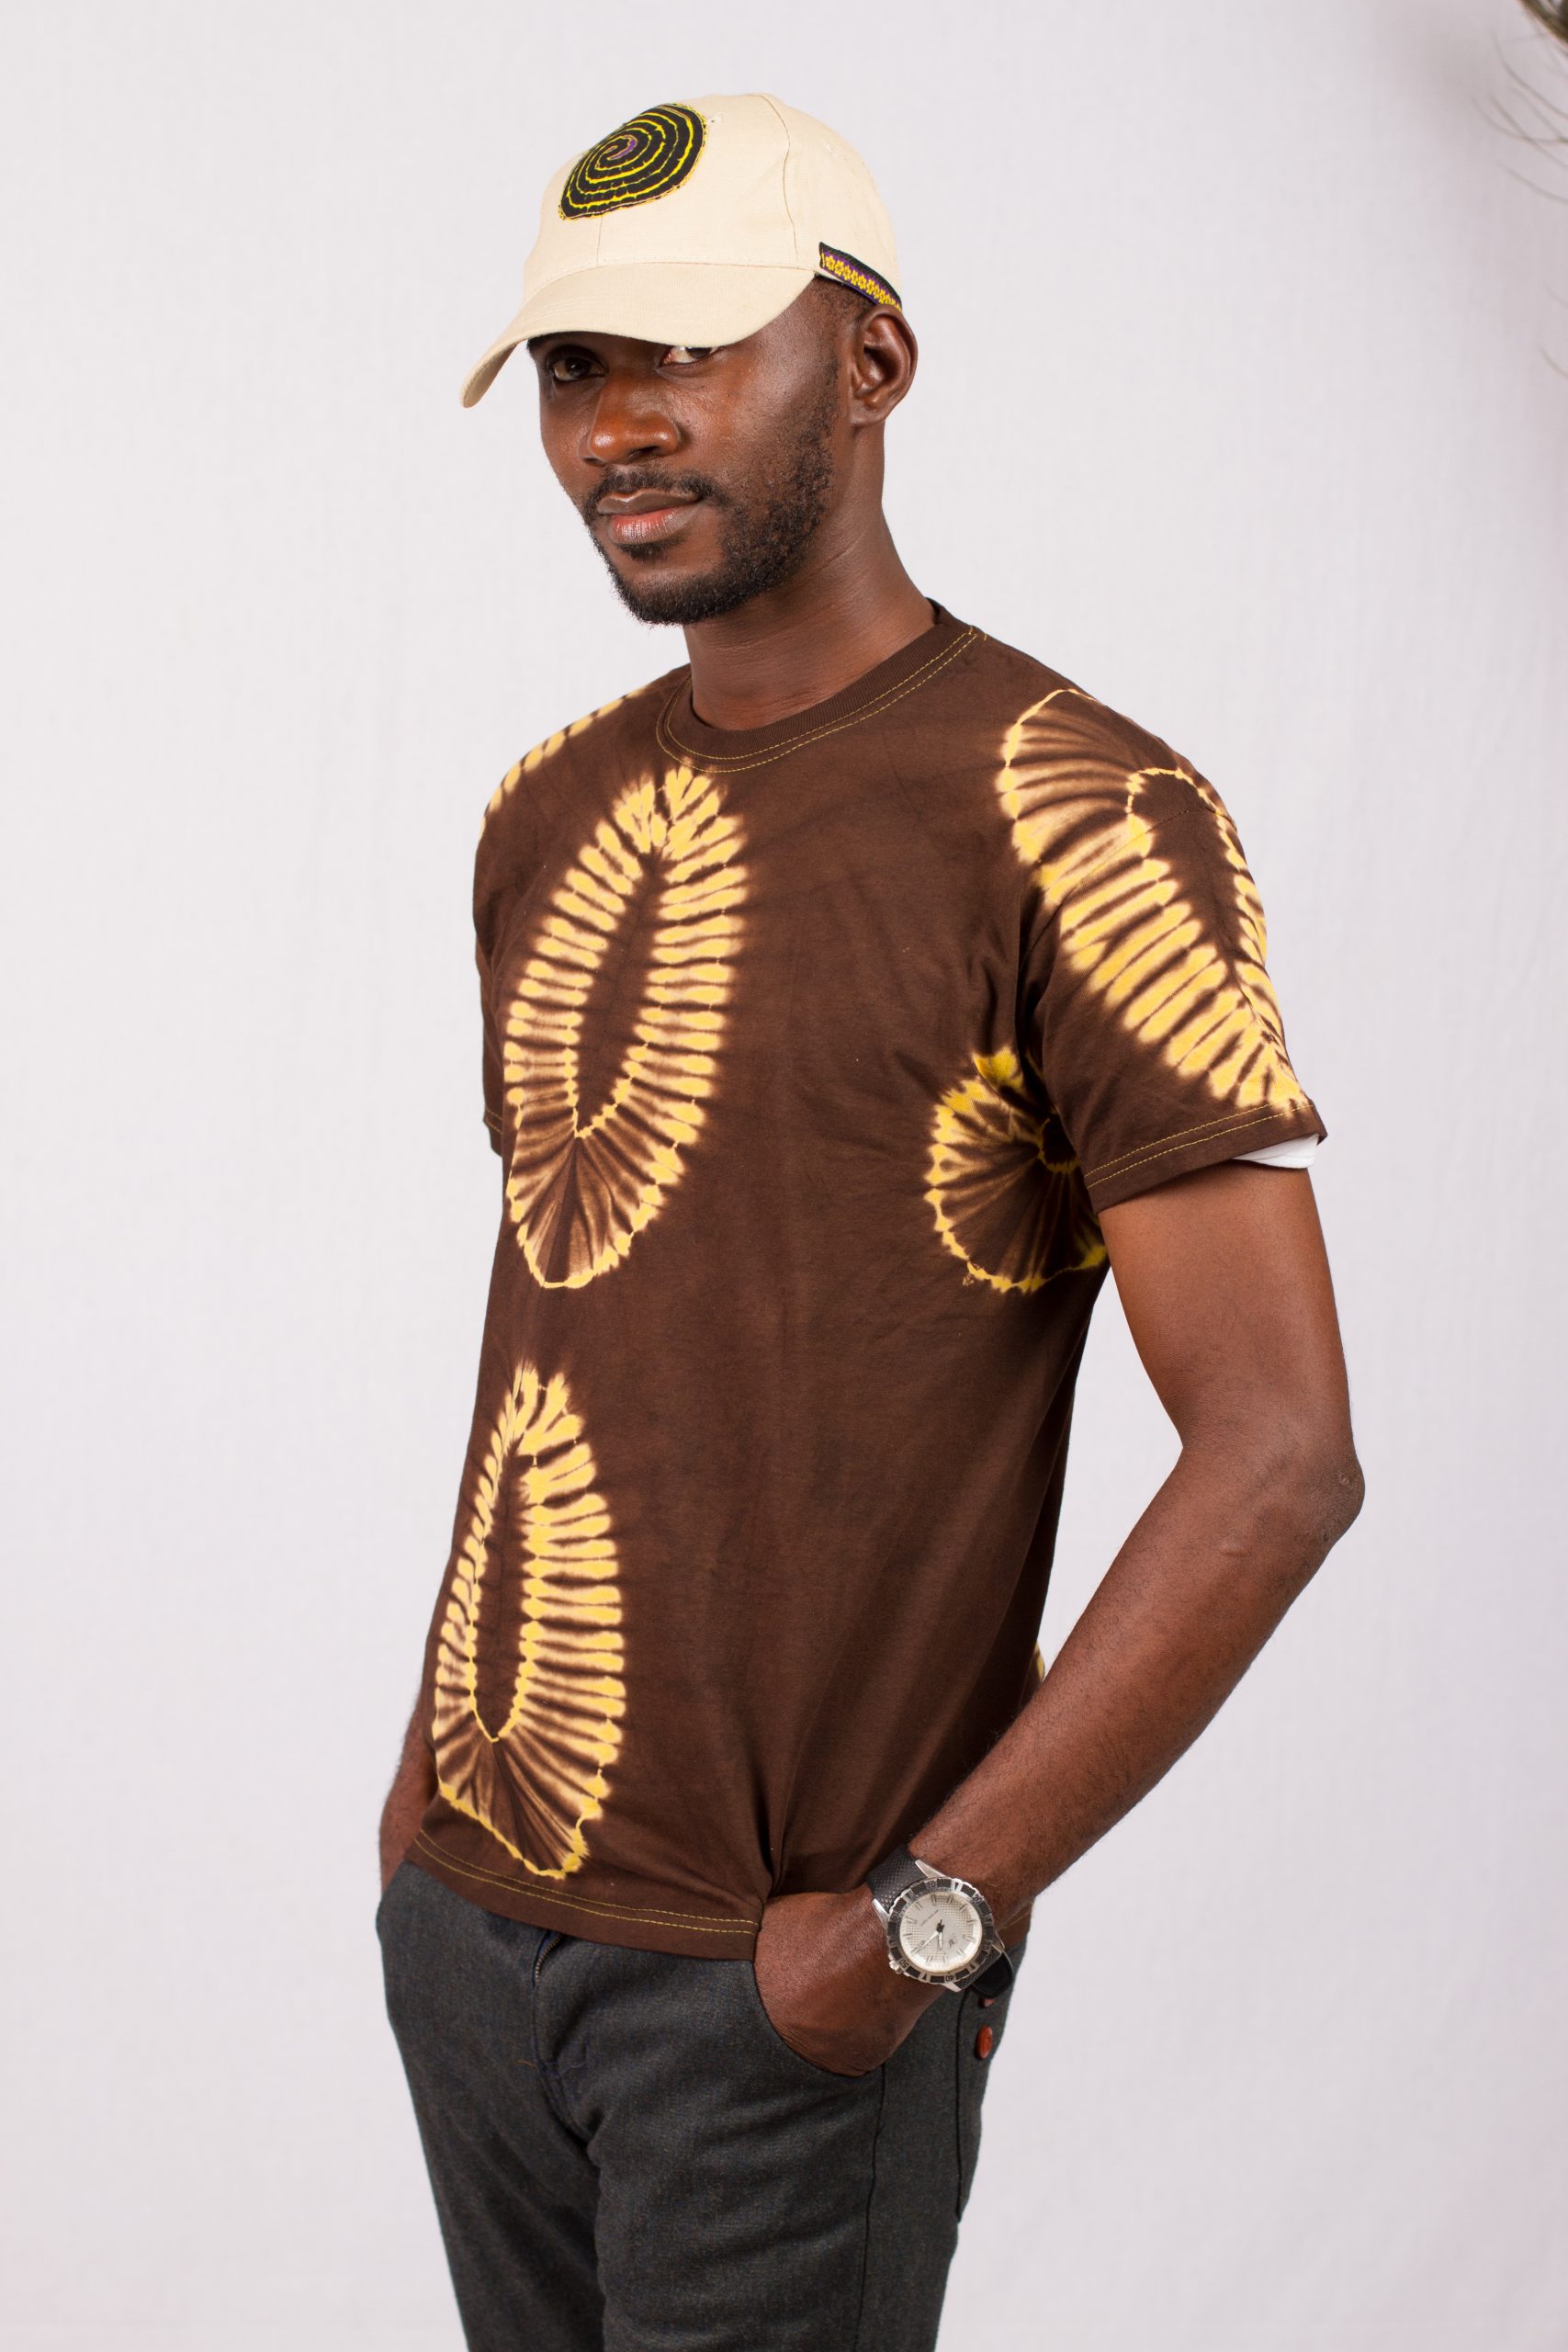 Afrikoncept in Labule: Expressing Afrocentric Fashion and Food